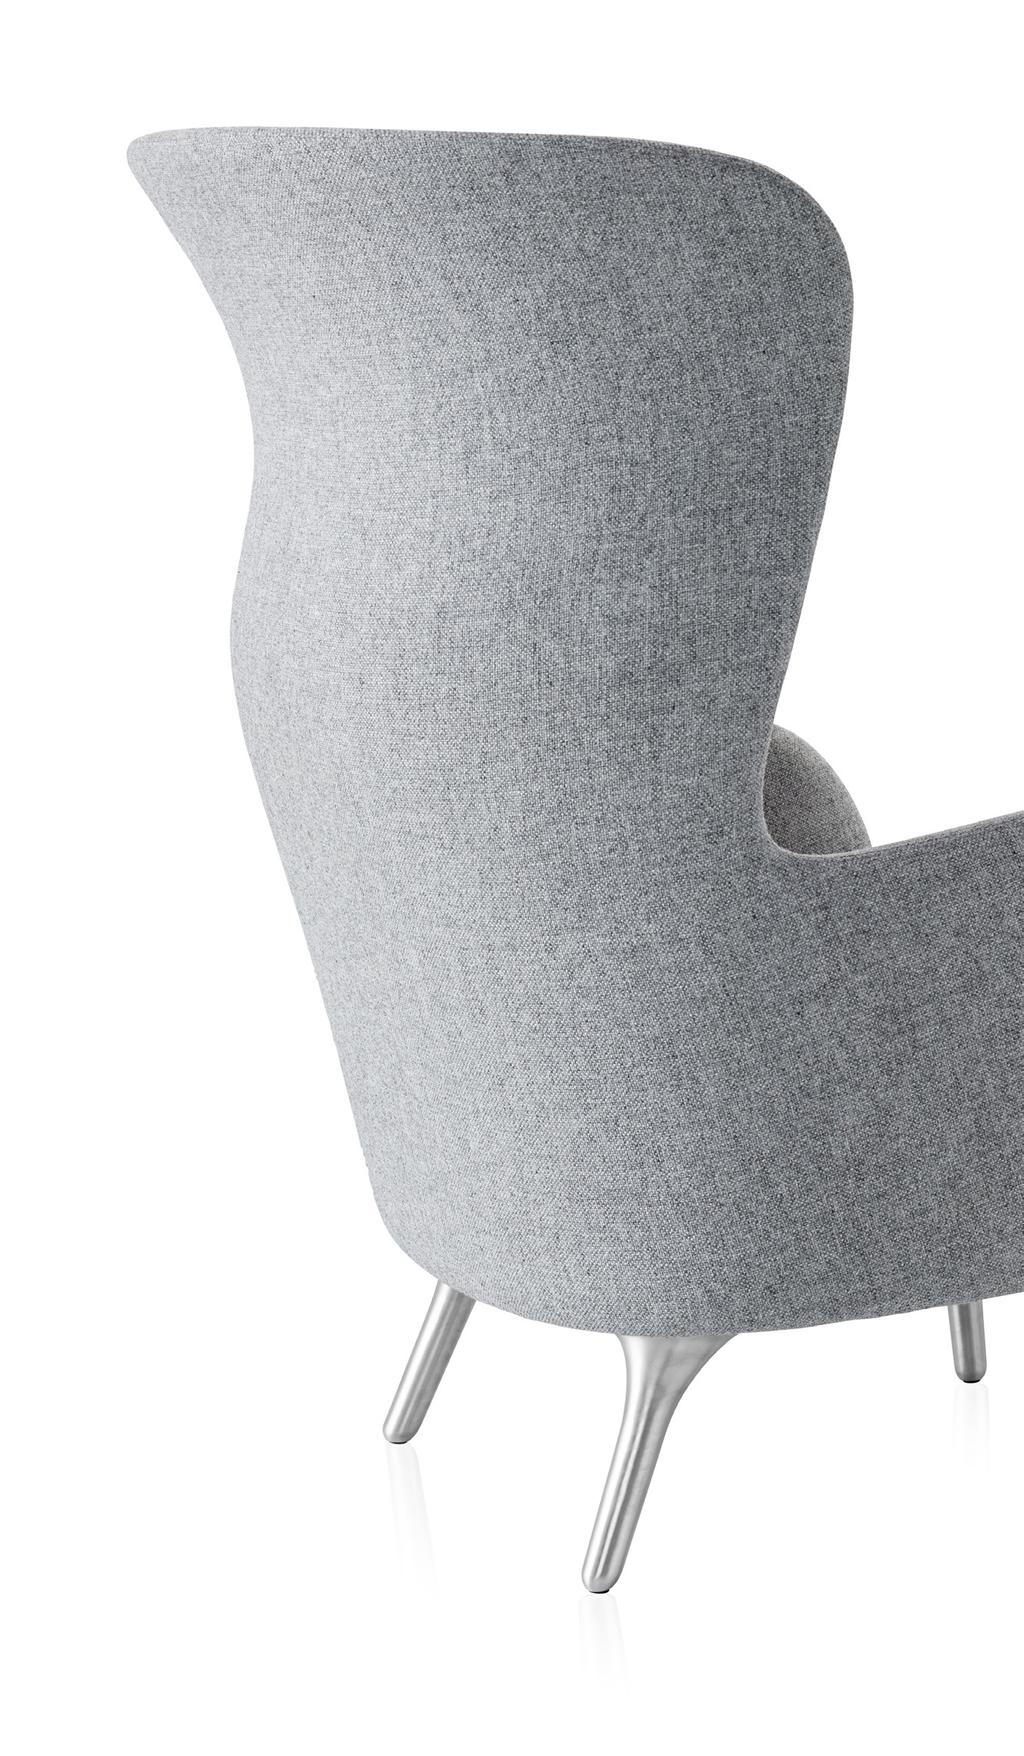 UPHOLSTERY Ro is presented in 9 unique designer colours all with a shade of grey to fit all interior To make the chair vivid and more inviting the colours are always a mix of two fabrics; one fabric